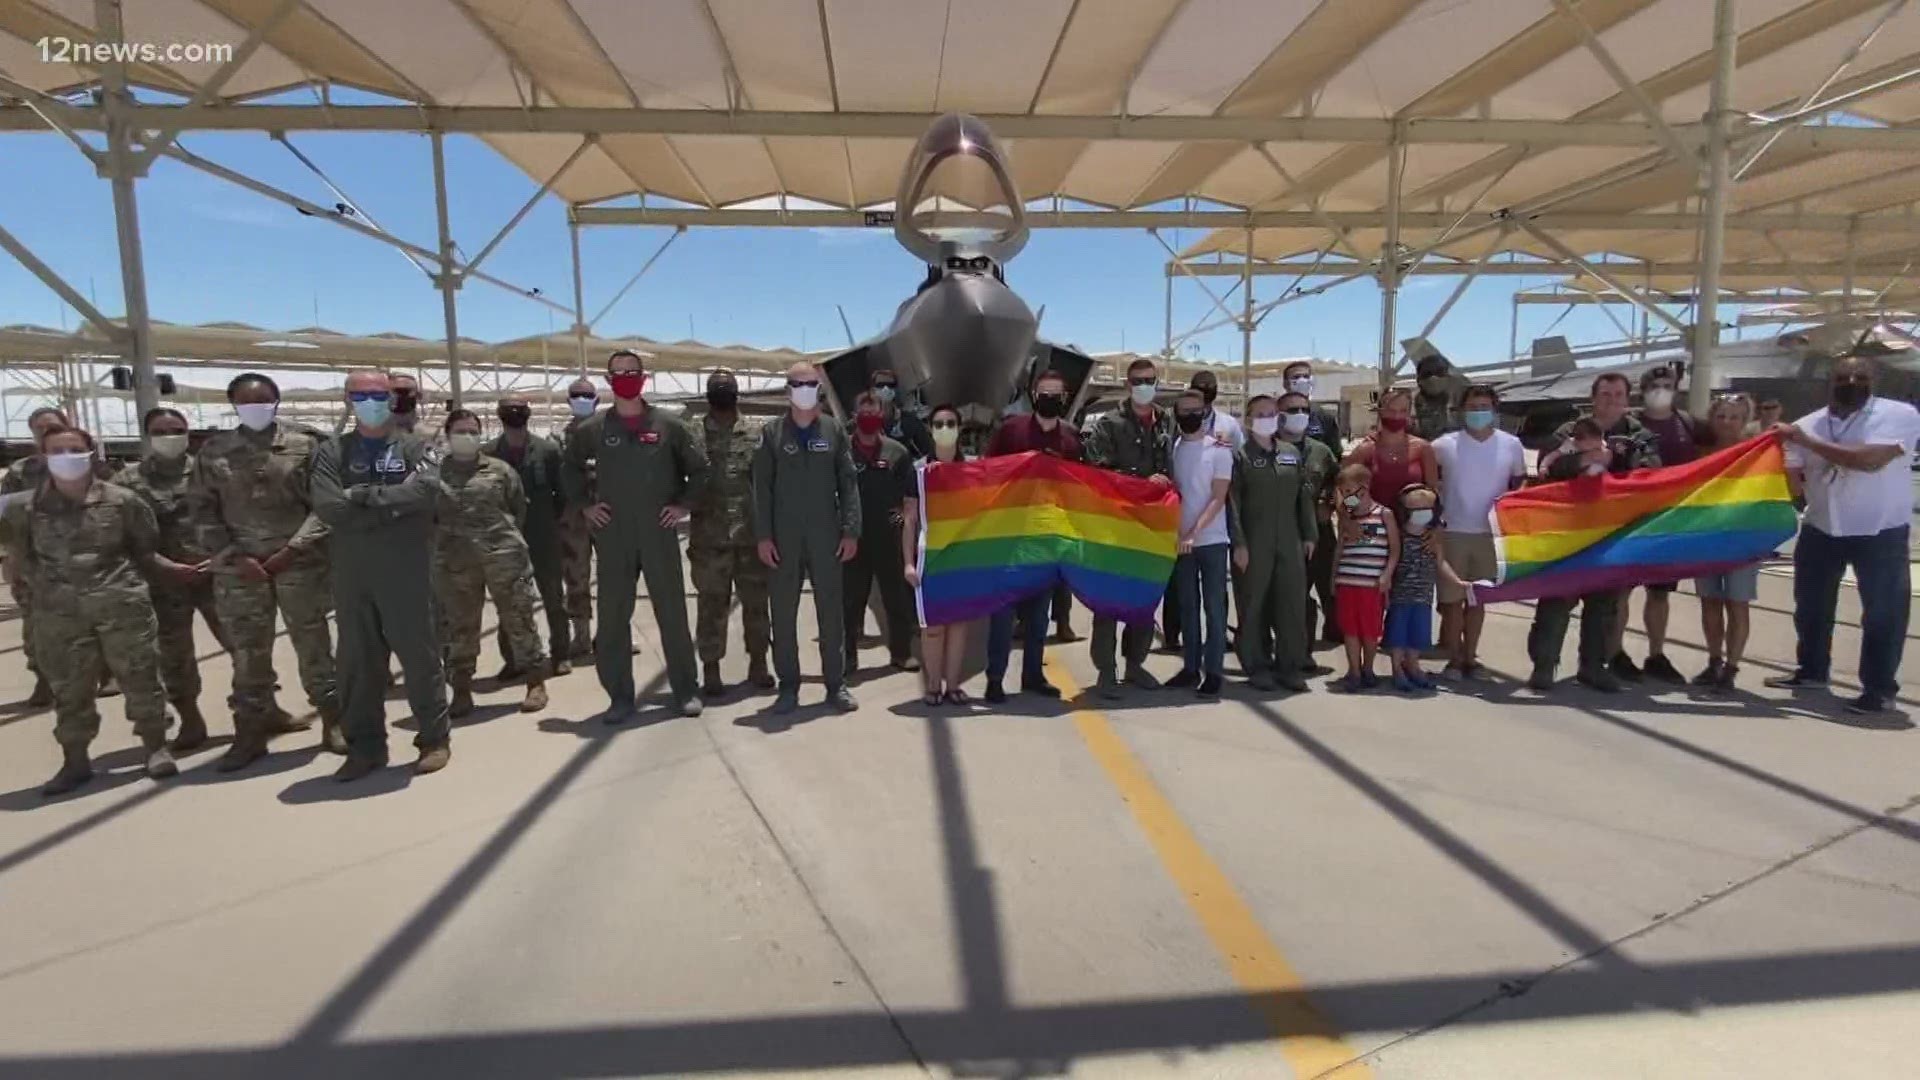 Tomorrow is World Pride Day, celebrating the LGBTQ community. This year, Luke AFB is joining the celebration with an historic flight.